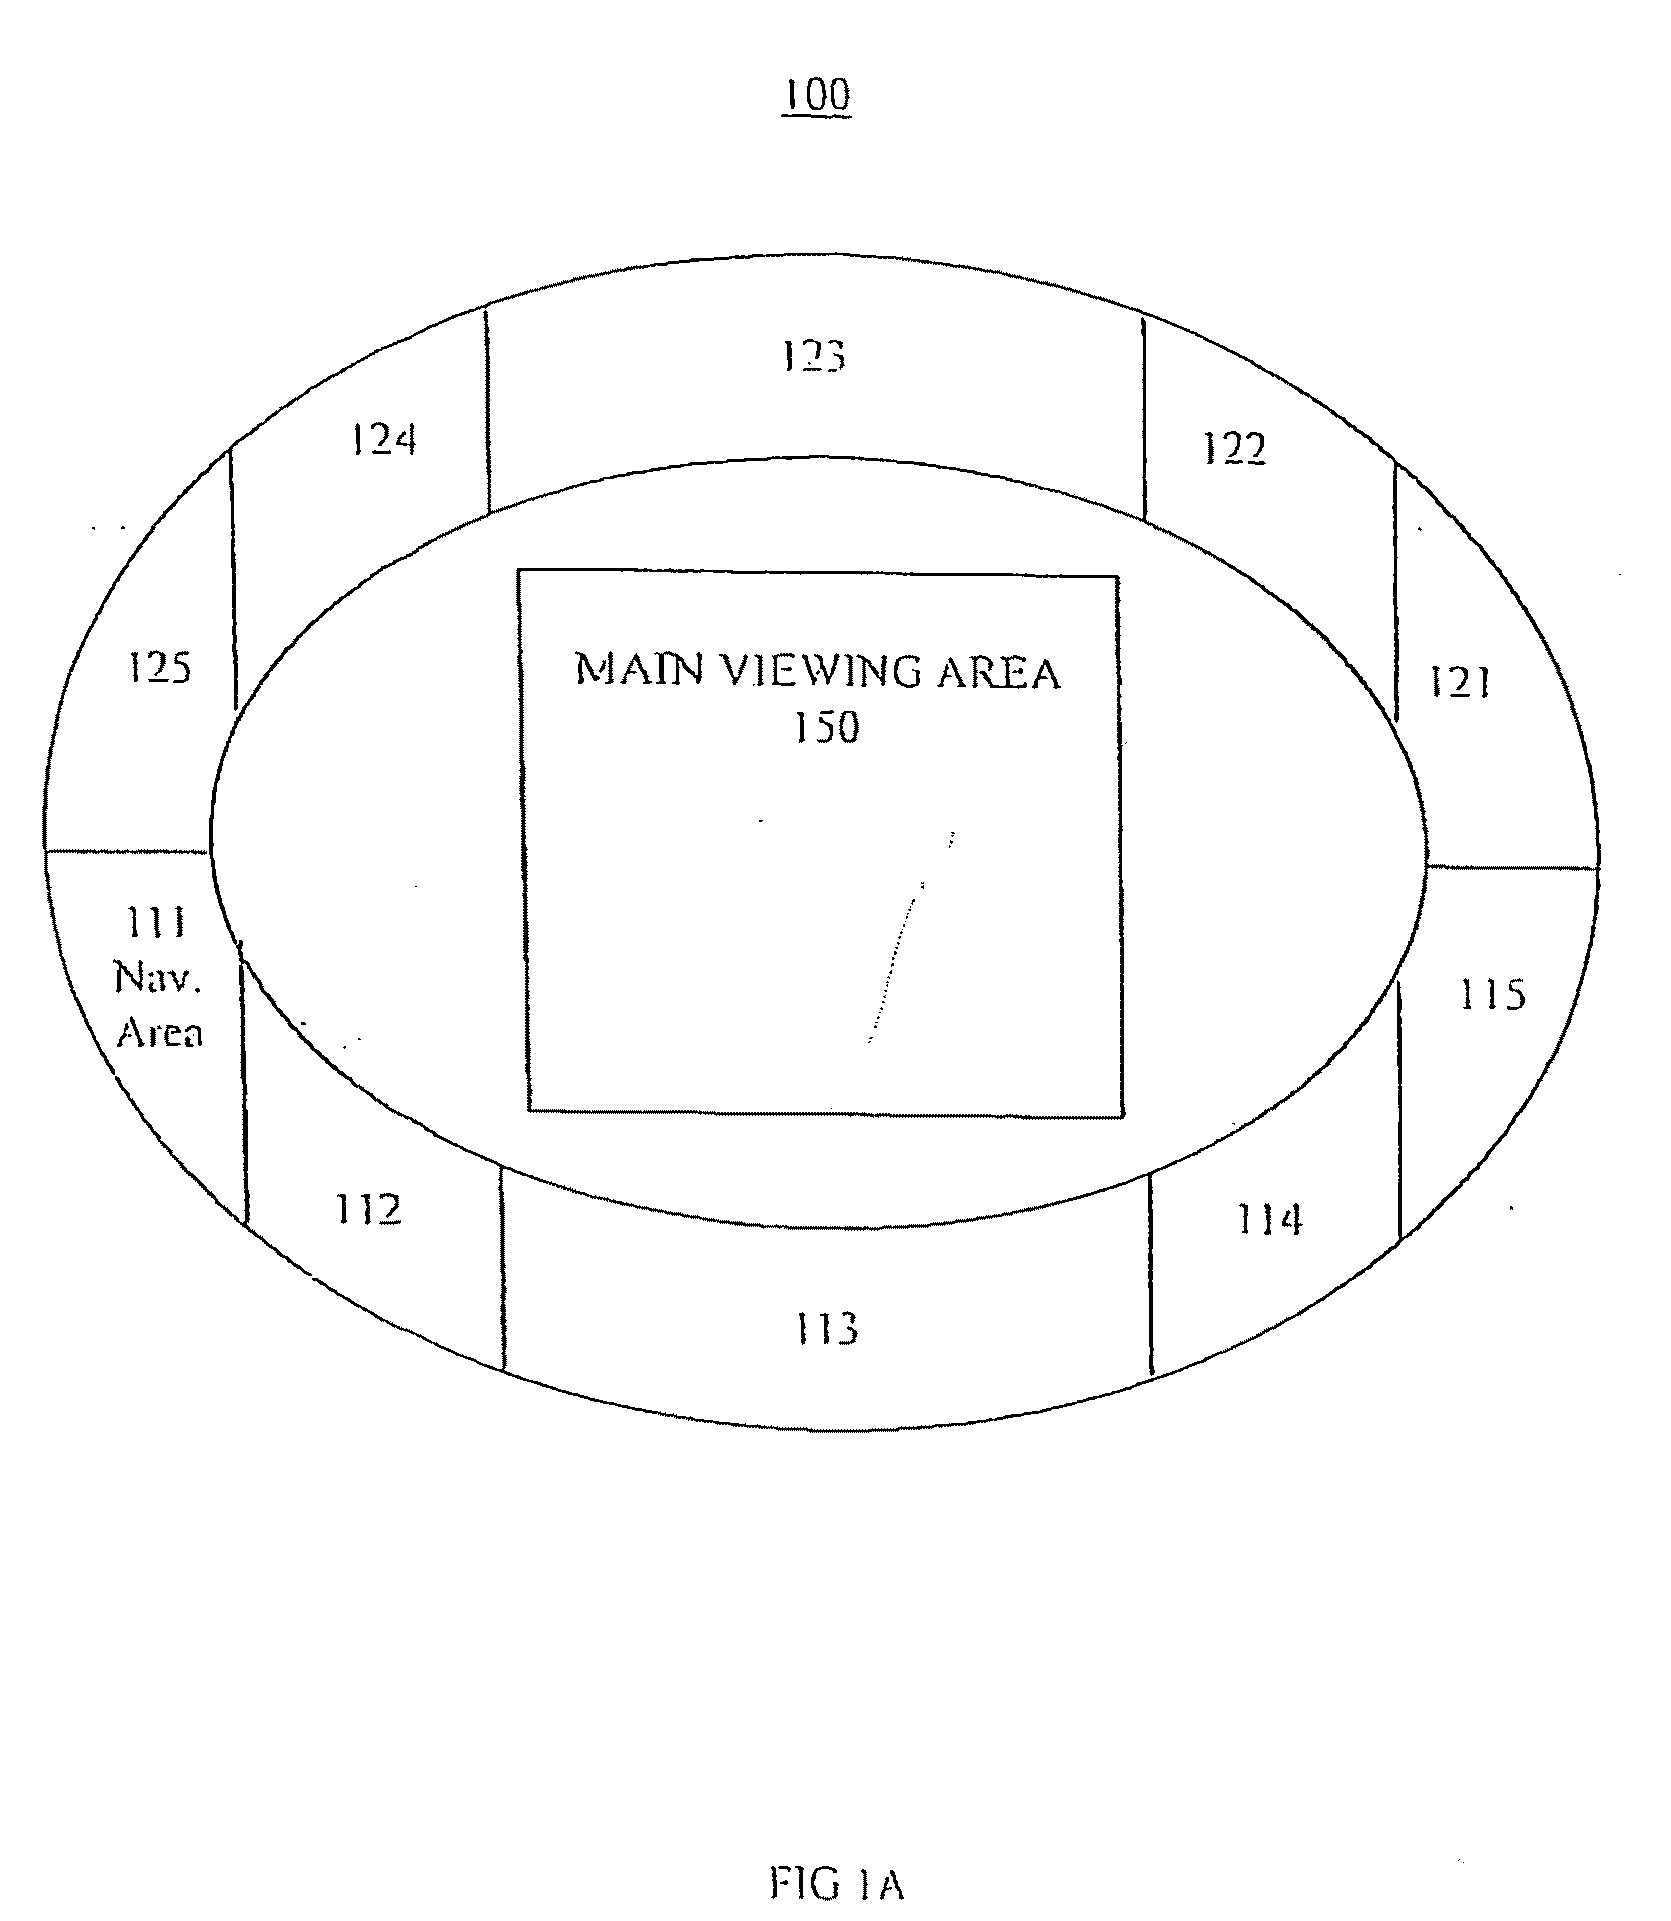 Video perspective navigation system and method